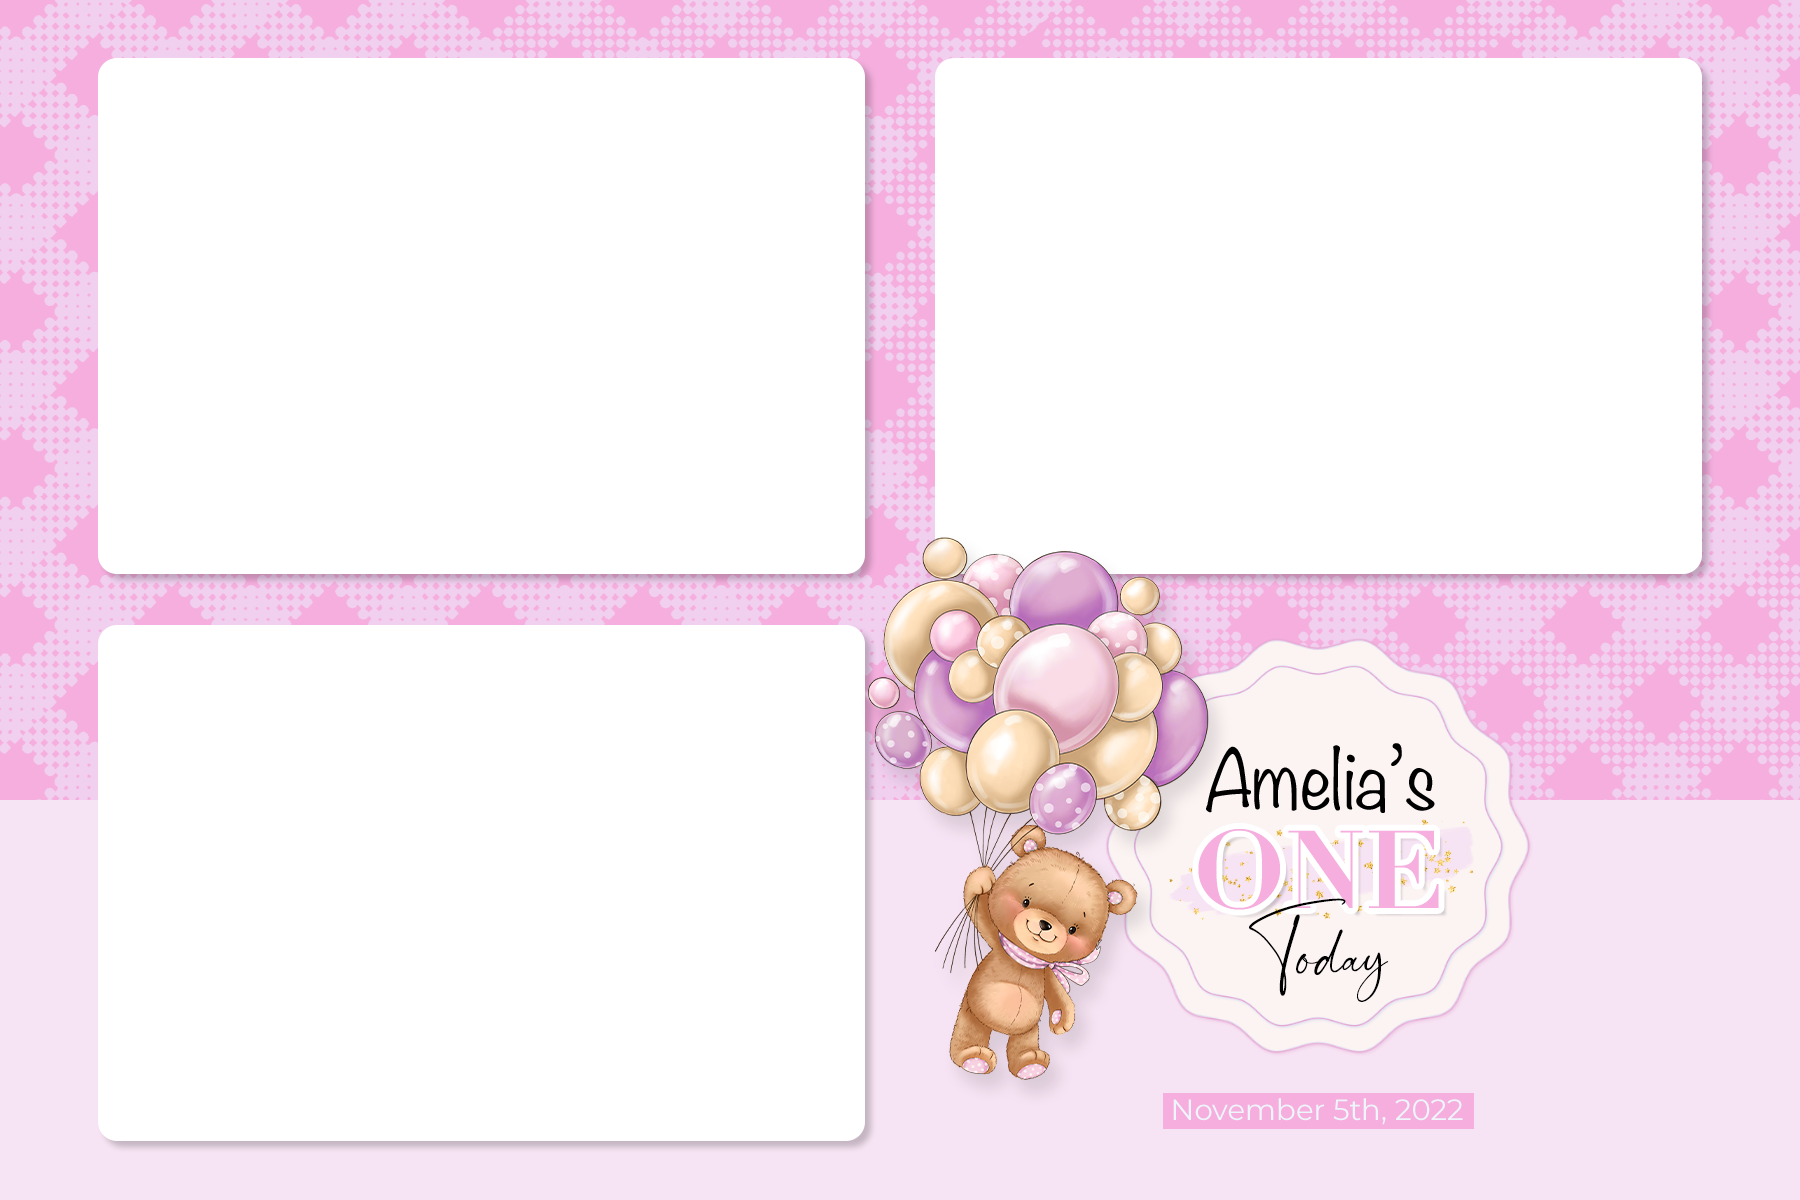 Photo Booth Print Templates